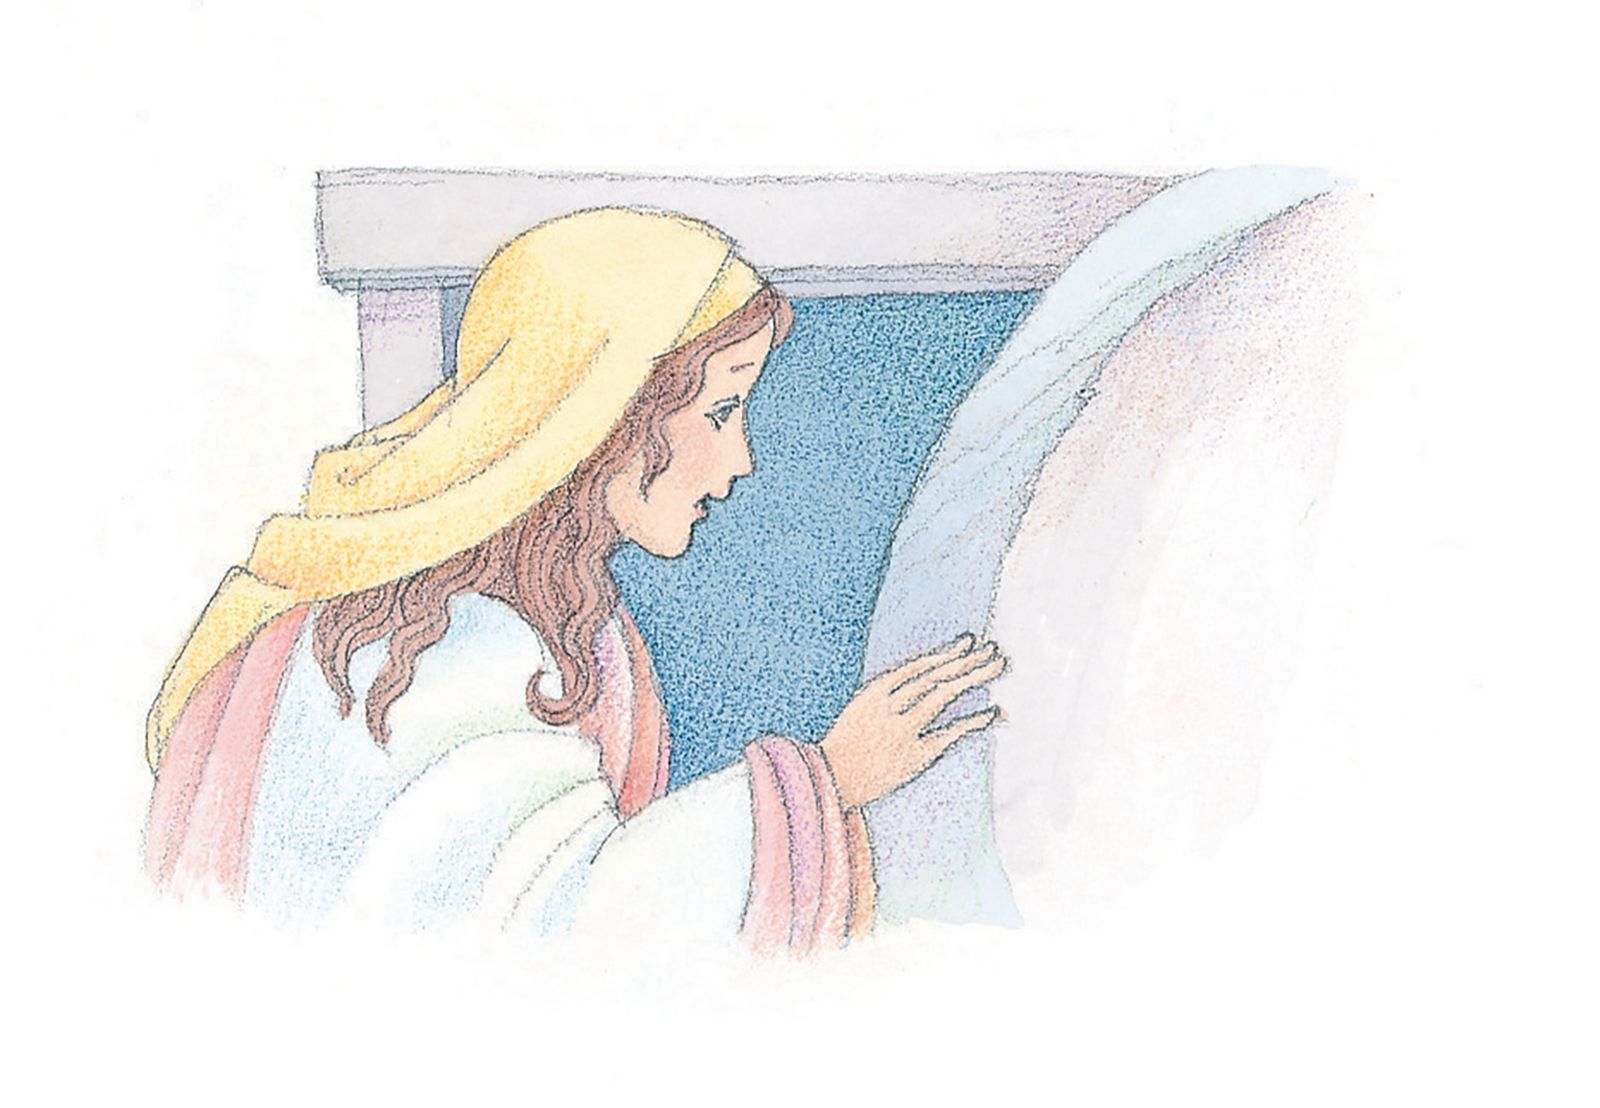 Mary peering into the empty tomb. From the Children’s Songbook, page 64, “Did Jesus Really Live Again?”; watercolor illustration by Phyllis Luch.